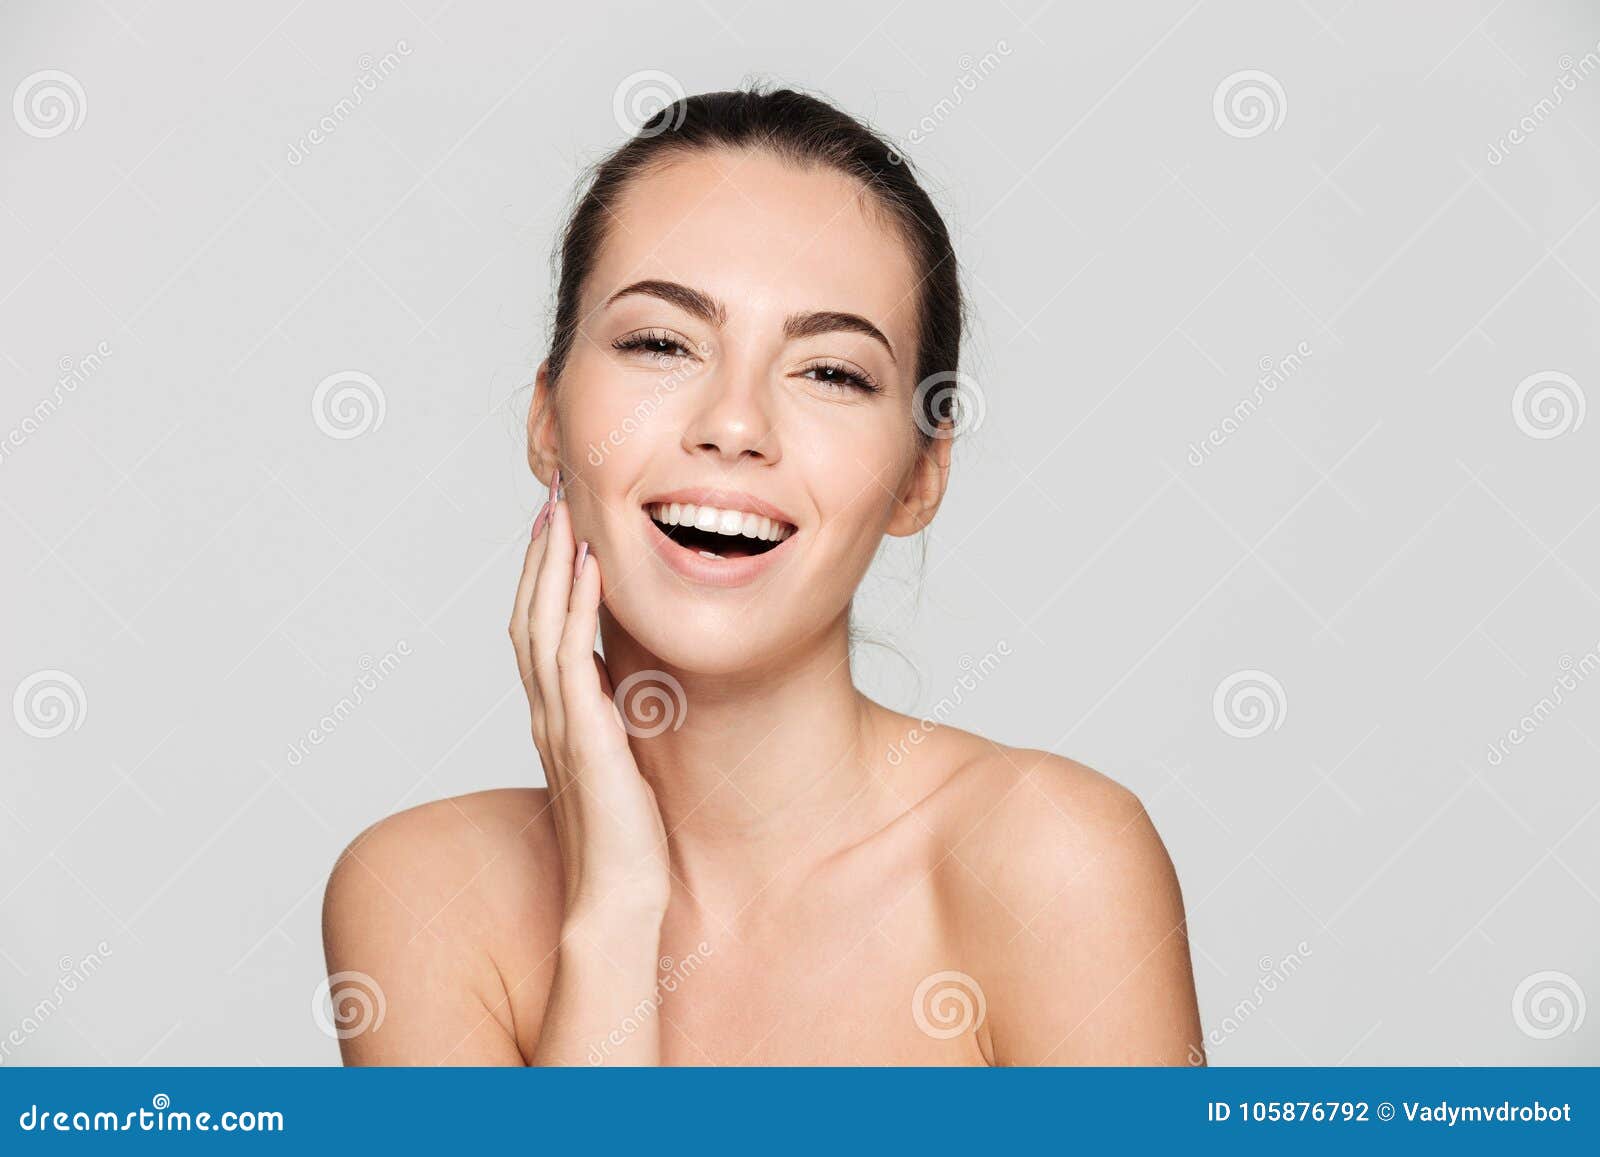 Stock Photo of Half-naked young woman looking at the 